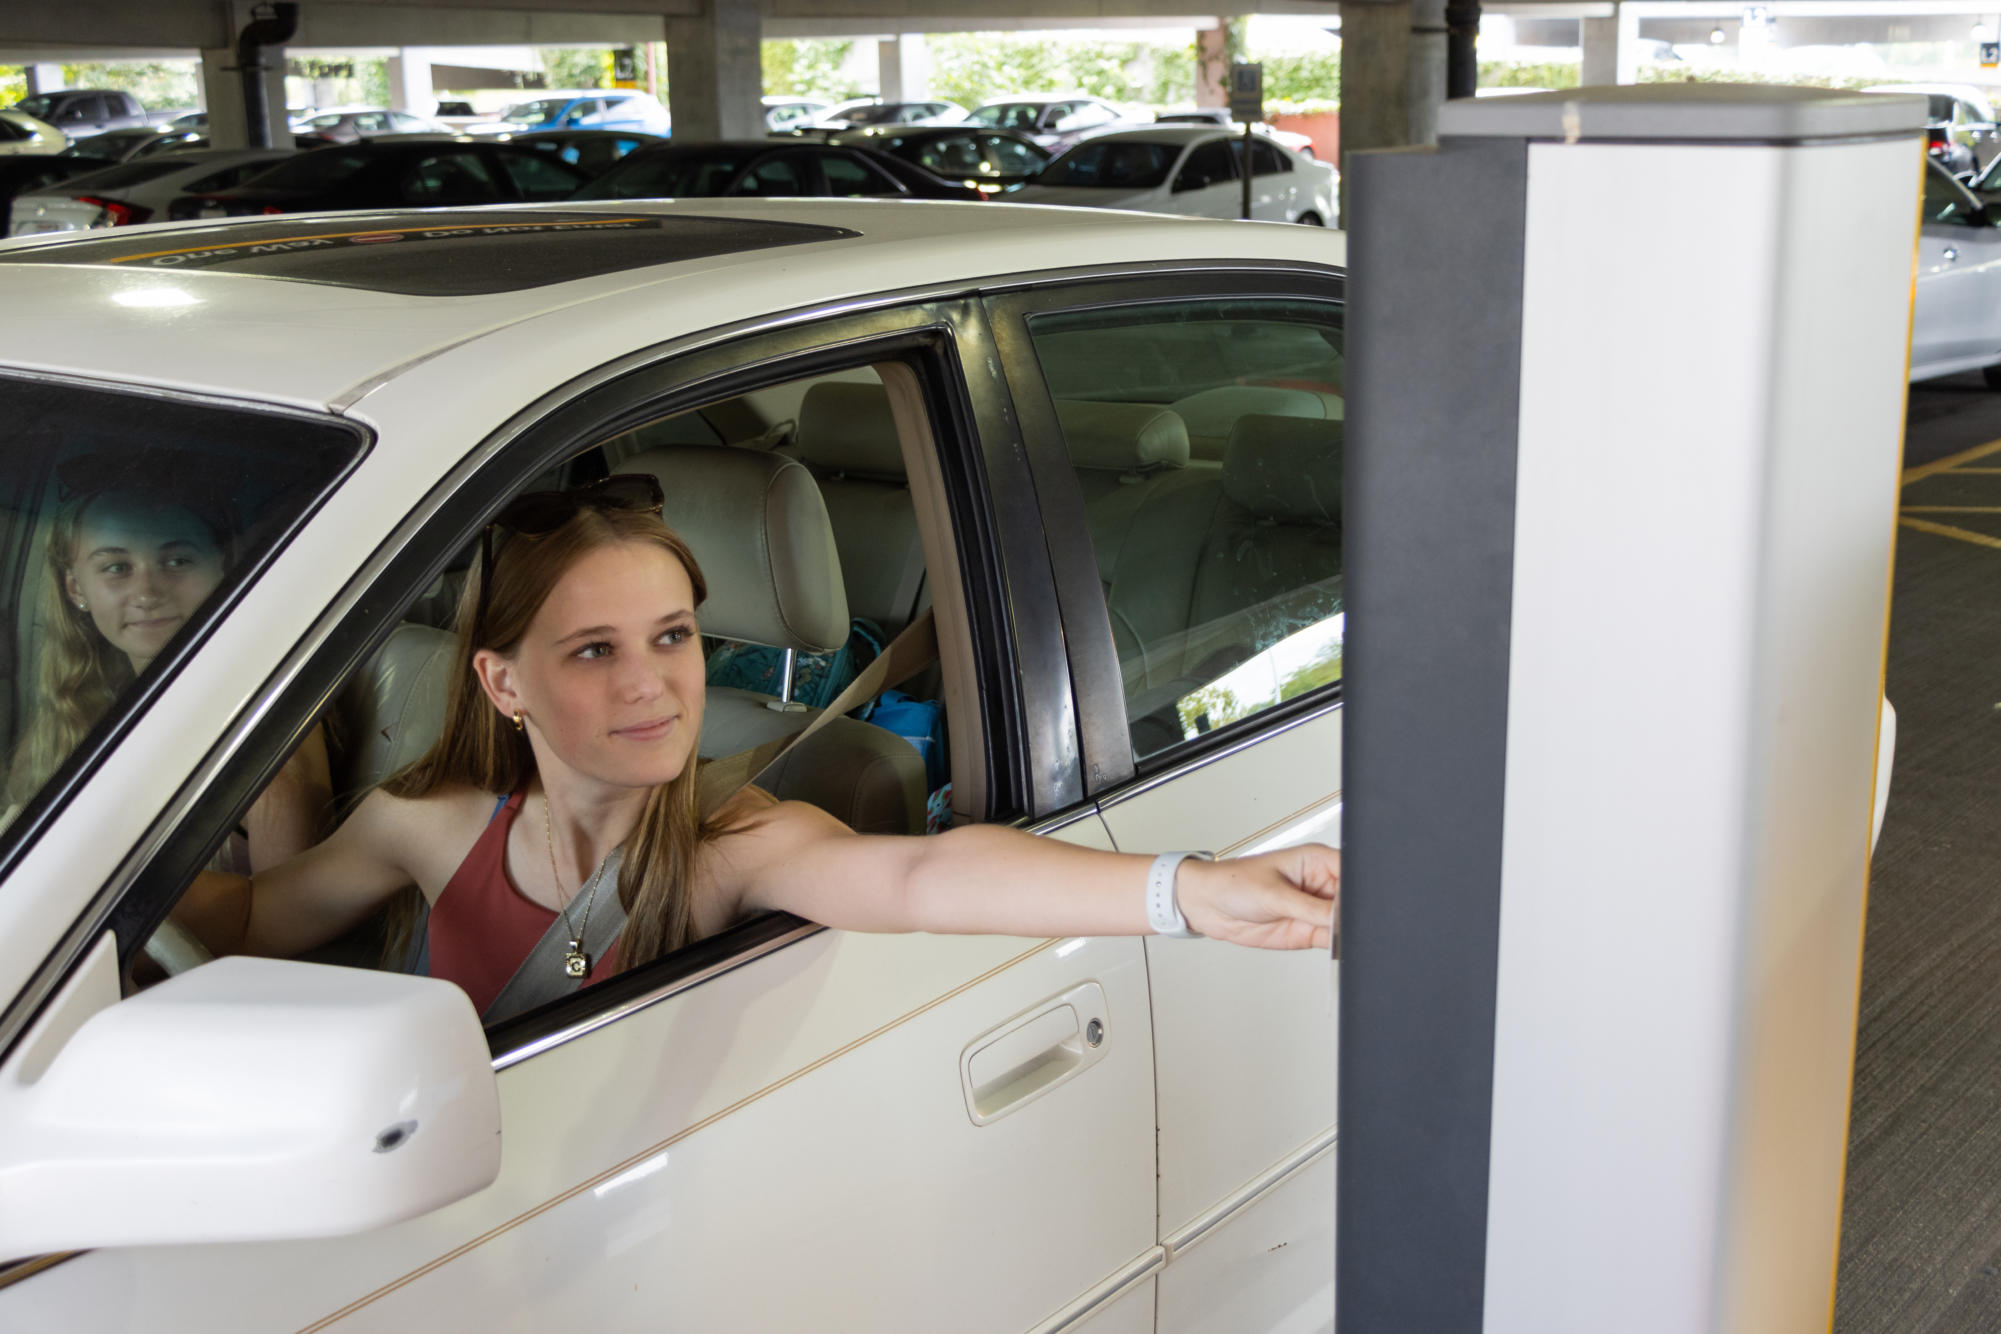 A student scans her parking permit before exiting the Kenton Garage.